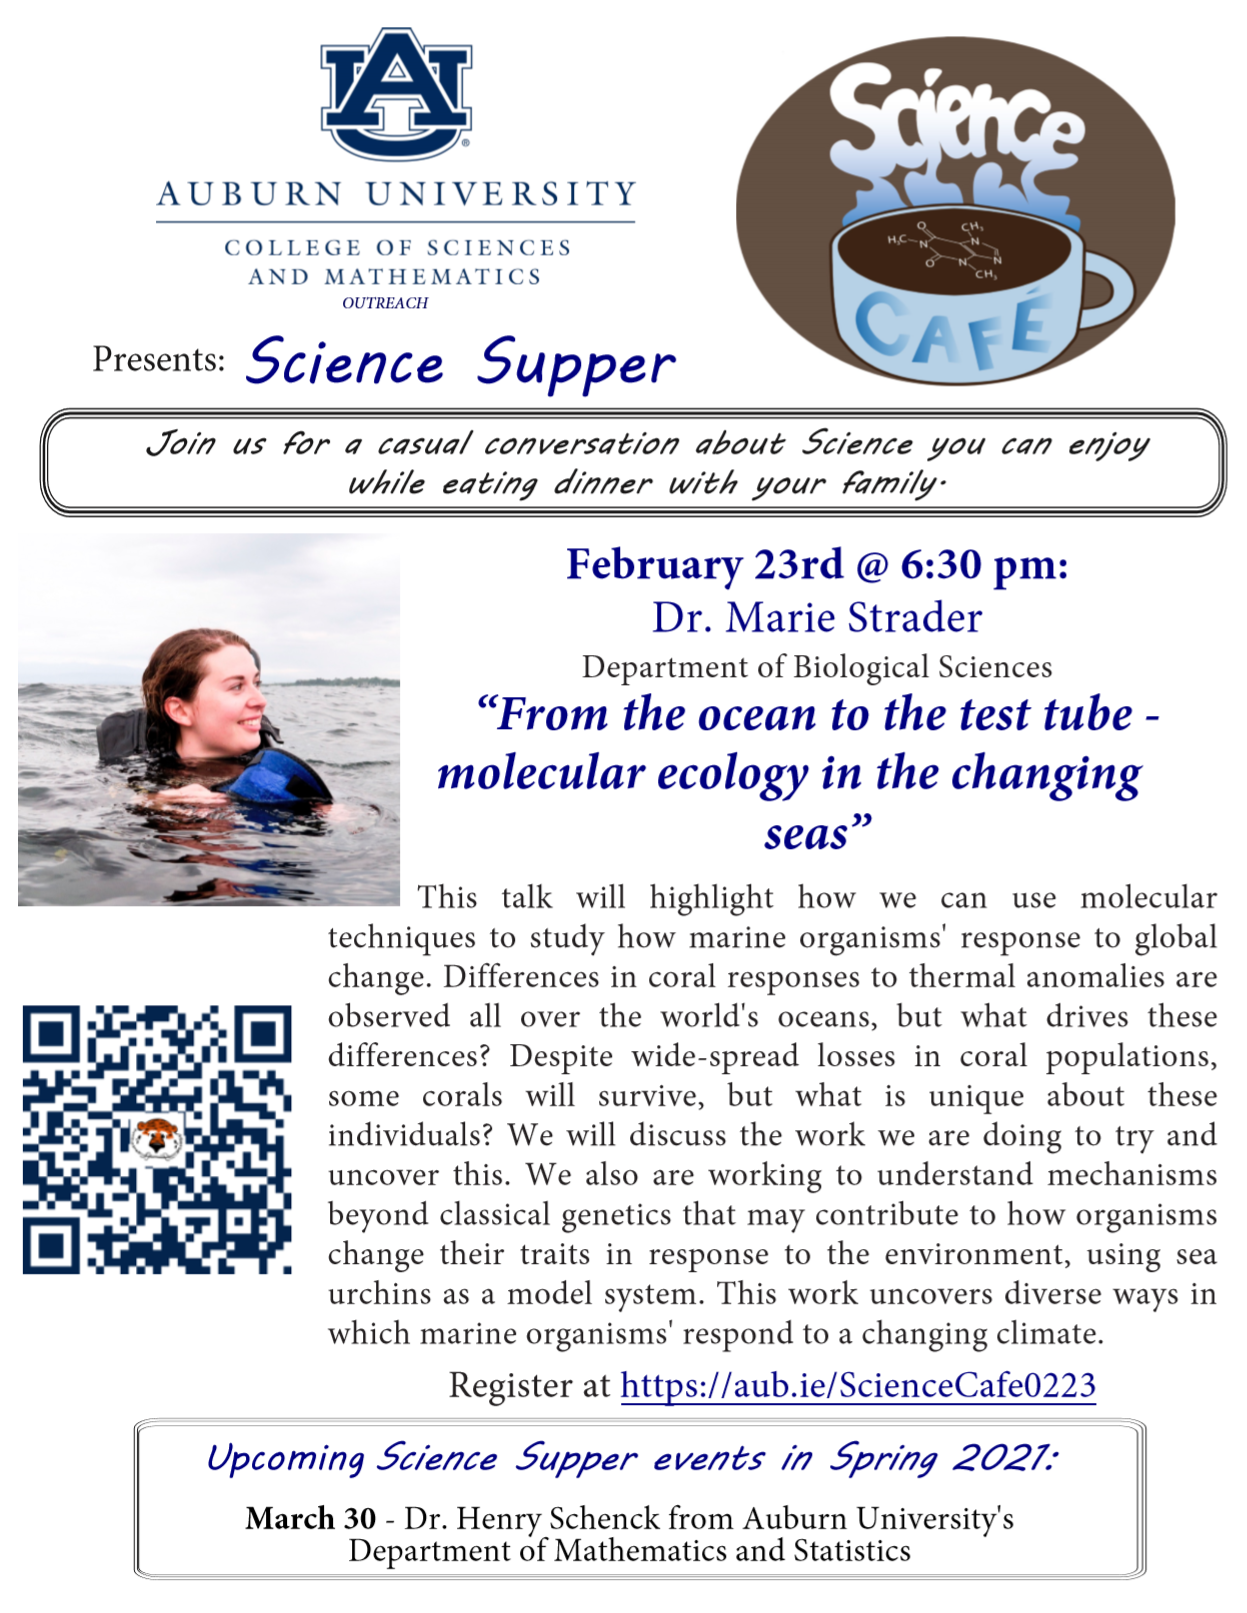 Join us for a virtual Science Supper with Marie Strader